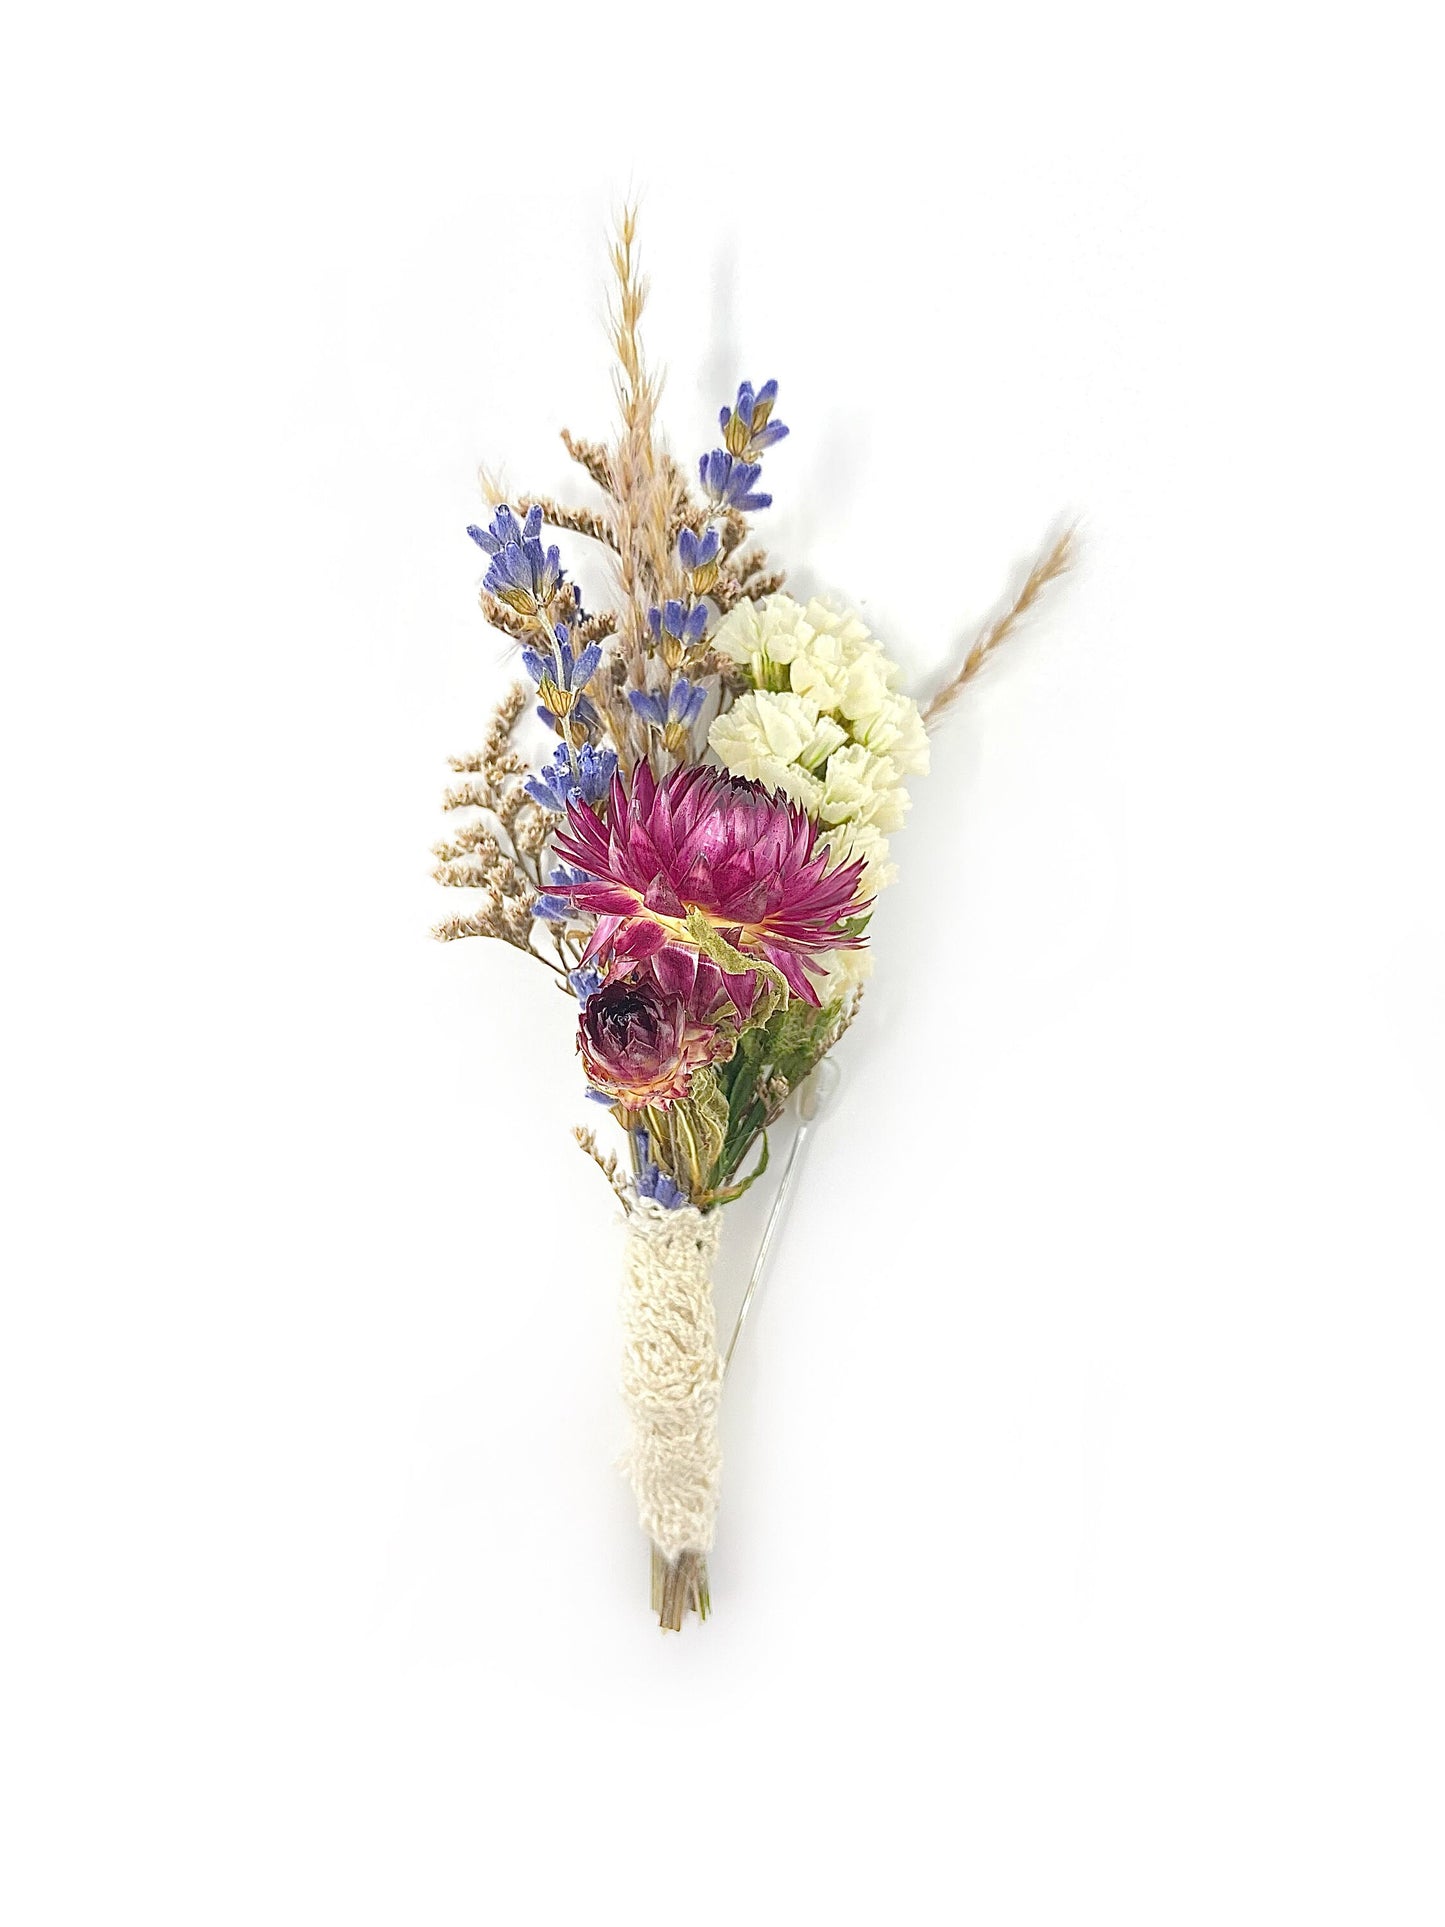 Wedding Boutonniere, Preserved Floral, Dried Flowers, Bridal Accessories, Decor, Strawflowers, Lavender